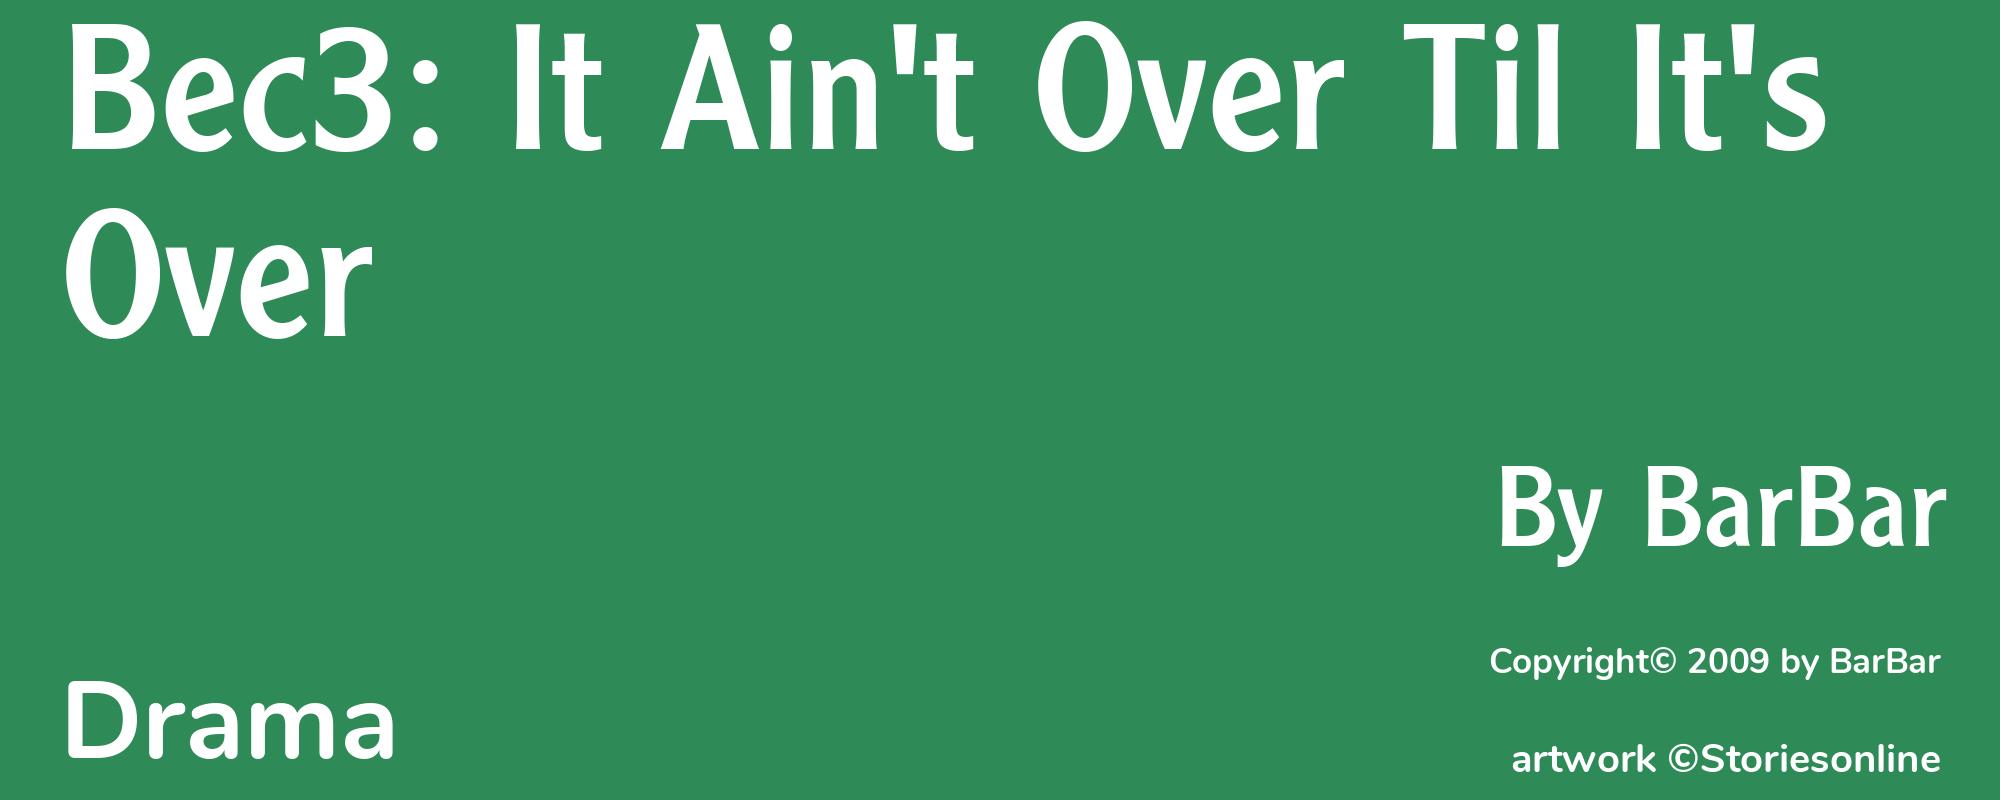 Bec3: It Ain't Over Til It's Over - Cover